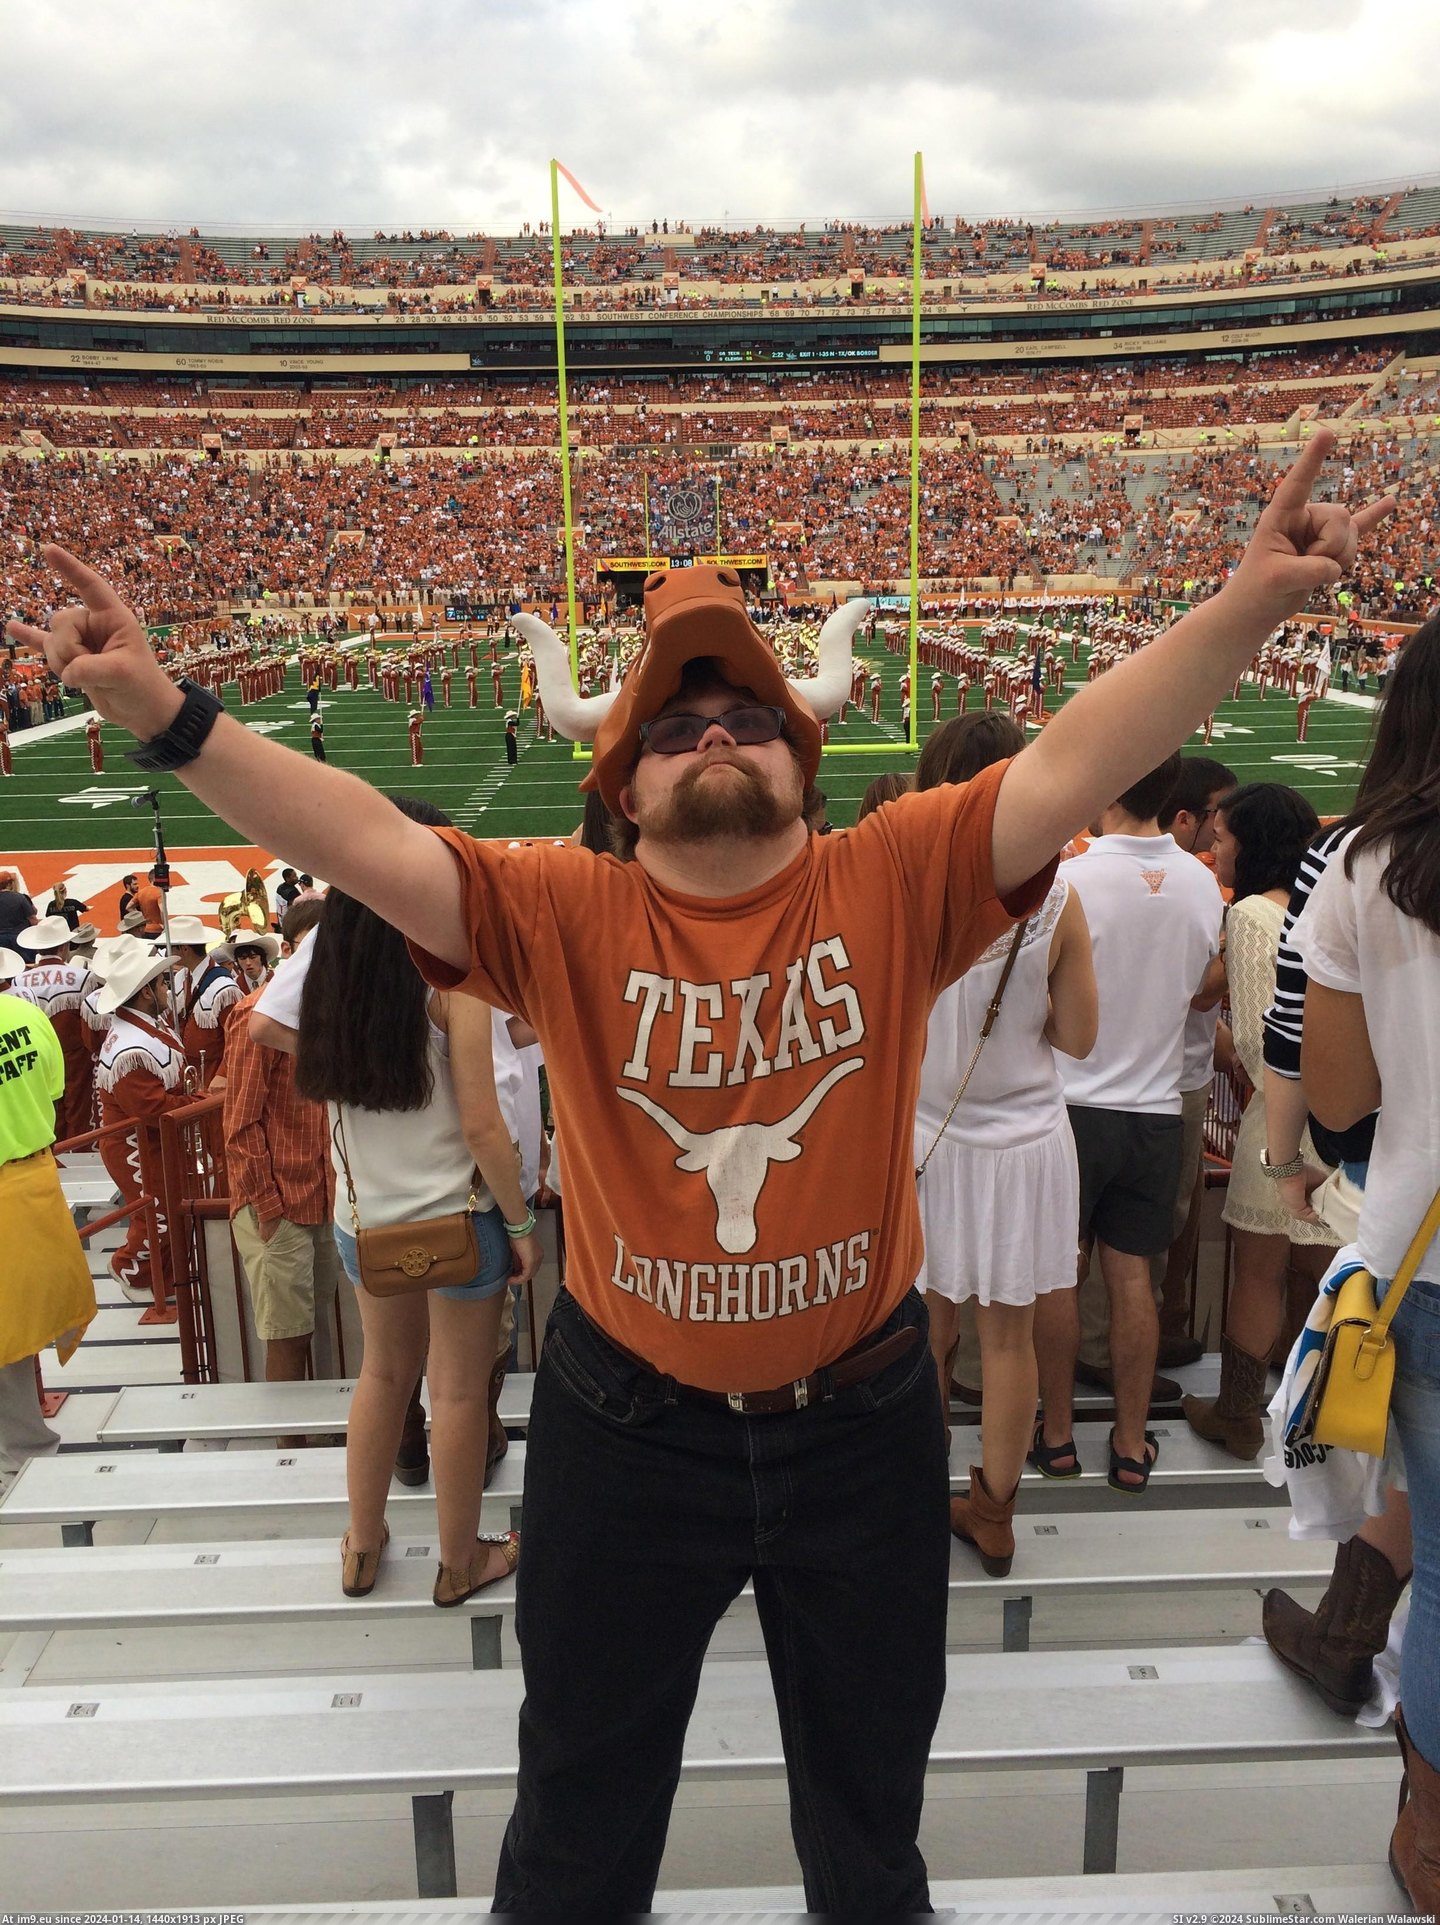 #Time #Game #Brother #Football #Syndrome #Great #Had [Pics] I took my brother with Down Syndrome to a UT football game, I think he had a great time... 1 Pic. (Изображение из альбом My r/PICS favs))